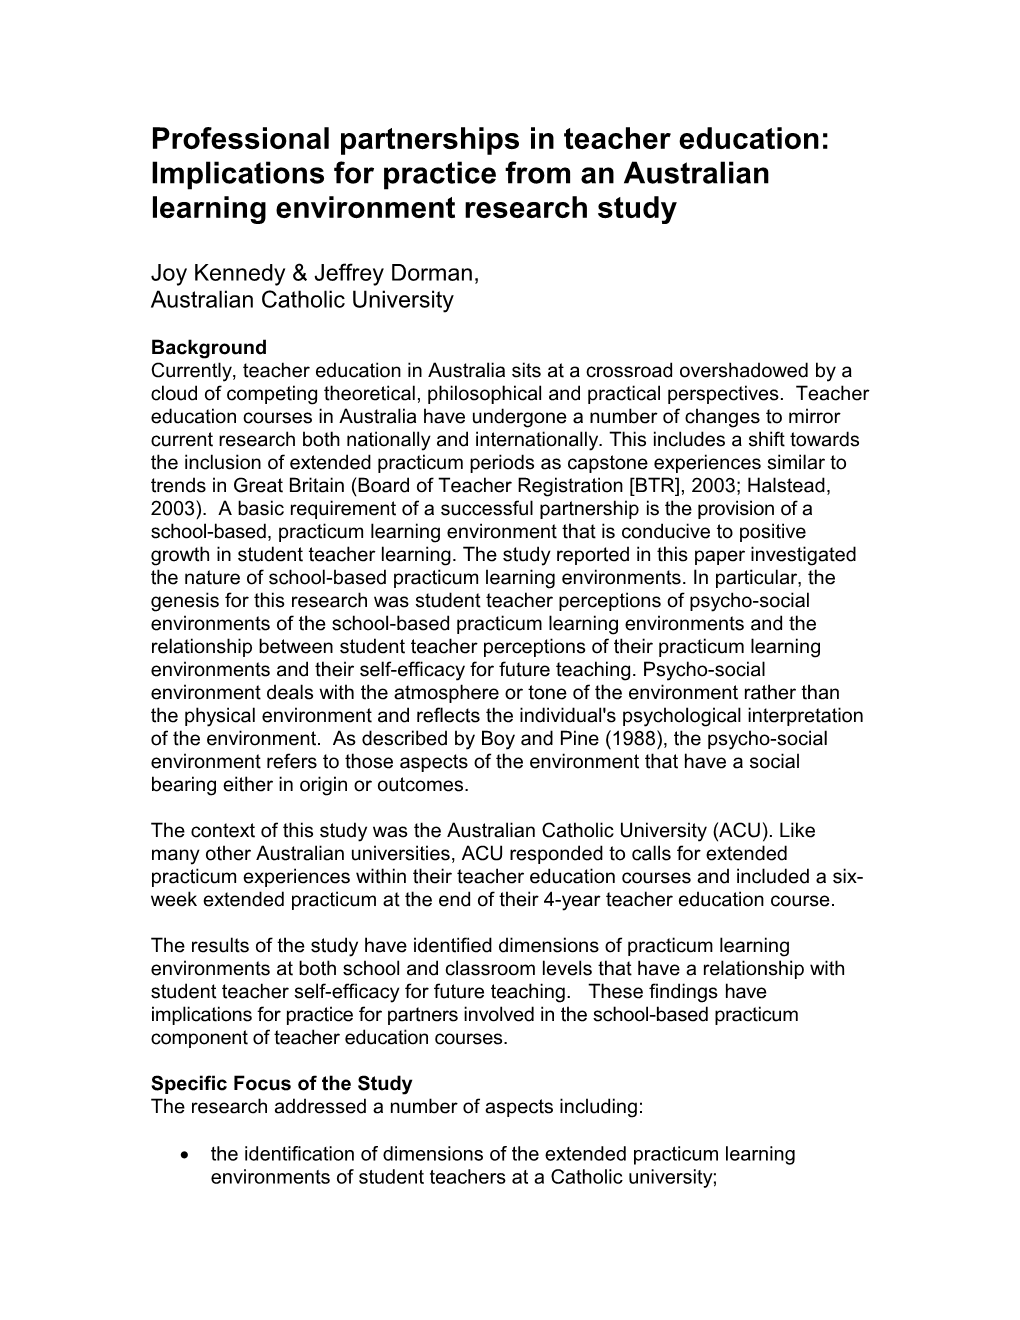 Professional Partnerships in Teacher Education: Implications for Practice from an Australian